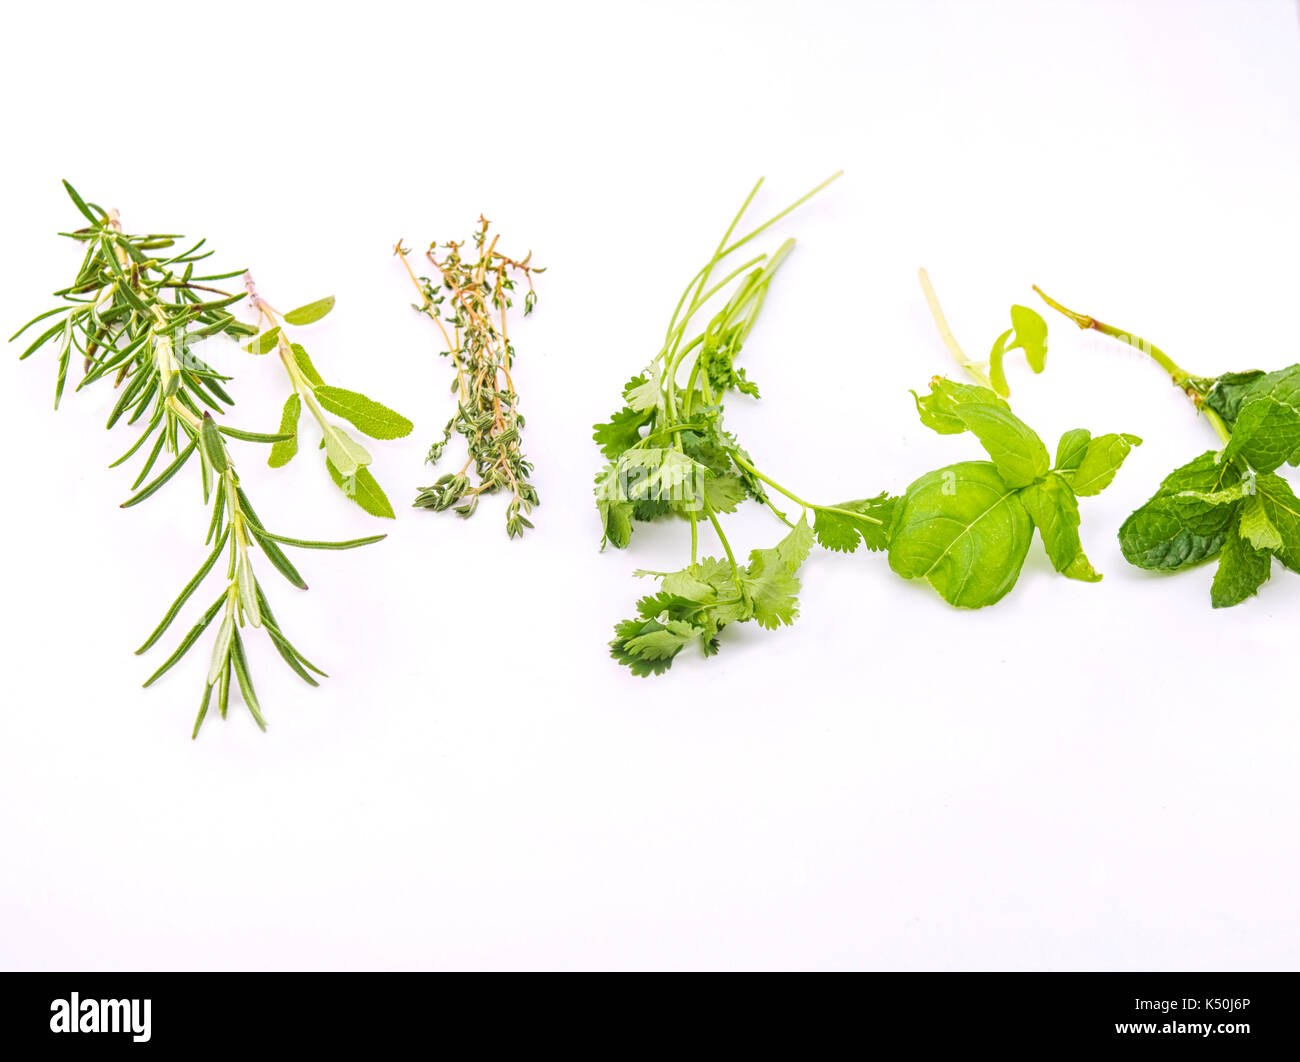 Green herbs. Rosemary, sage, thyme, coriander, basil, peppermint on white background Stock Photo